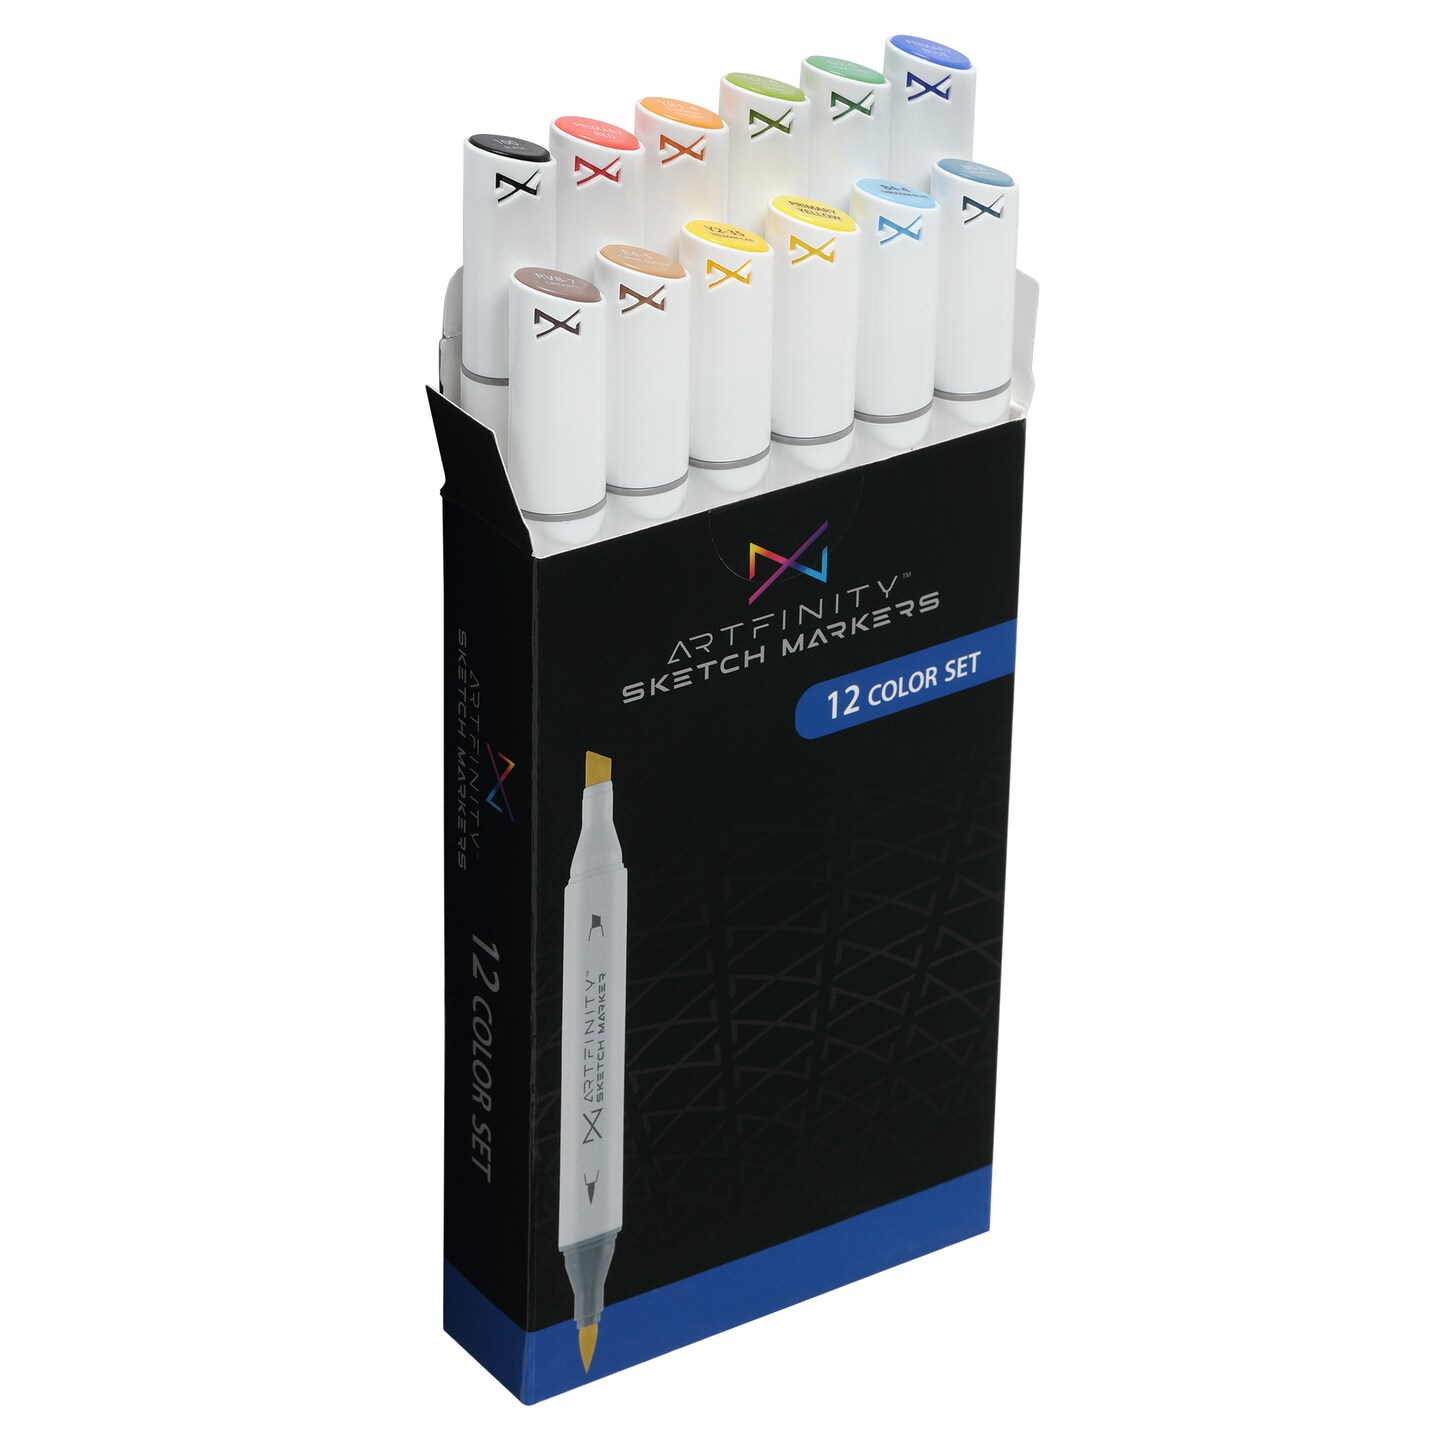 Artfinity Sketch Marker Sets - Vibrant, Professional, Dye-Based Alcohol Markers for Artists, Students, Drawing, Travel, &#x26; More!